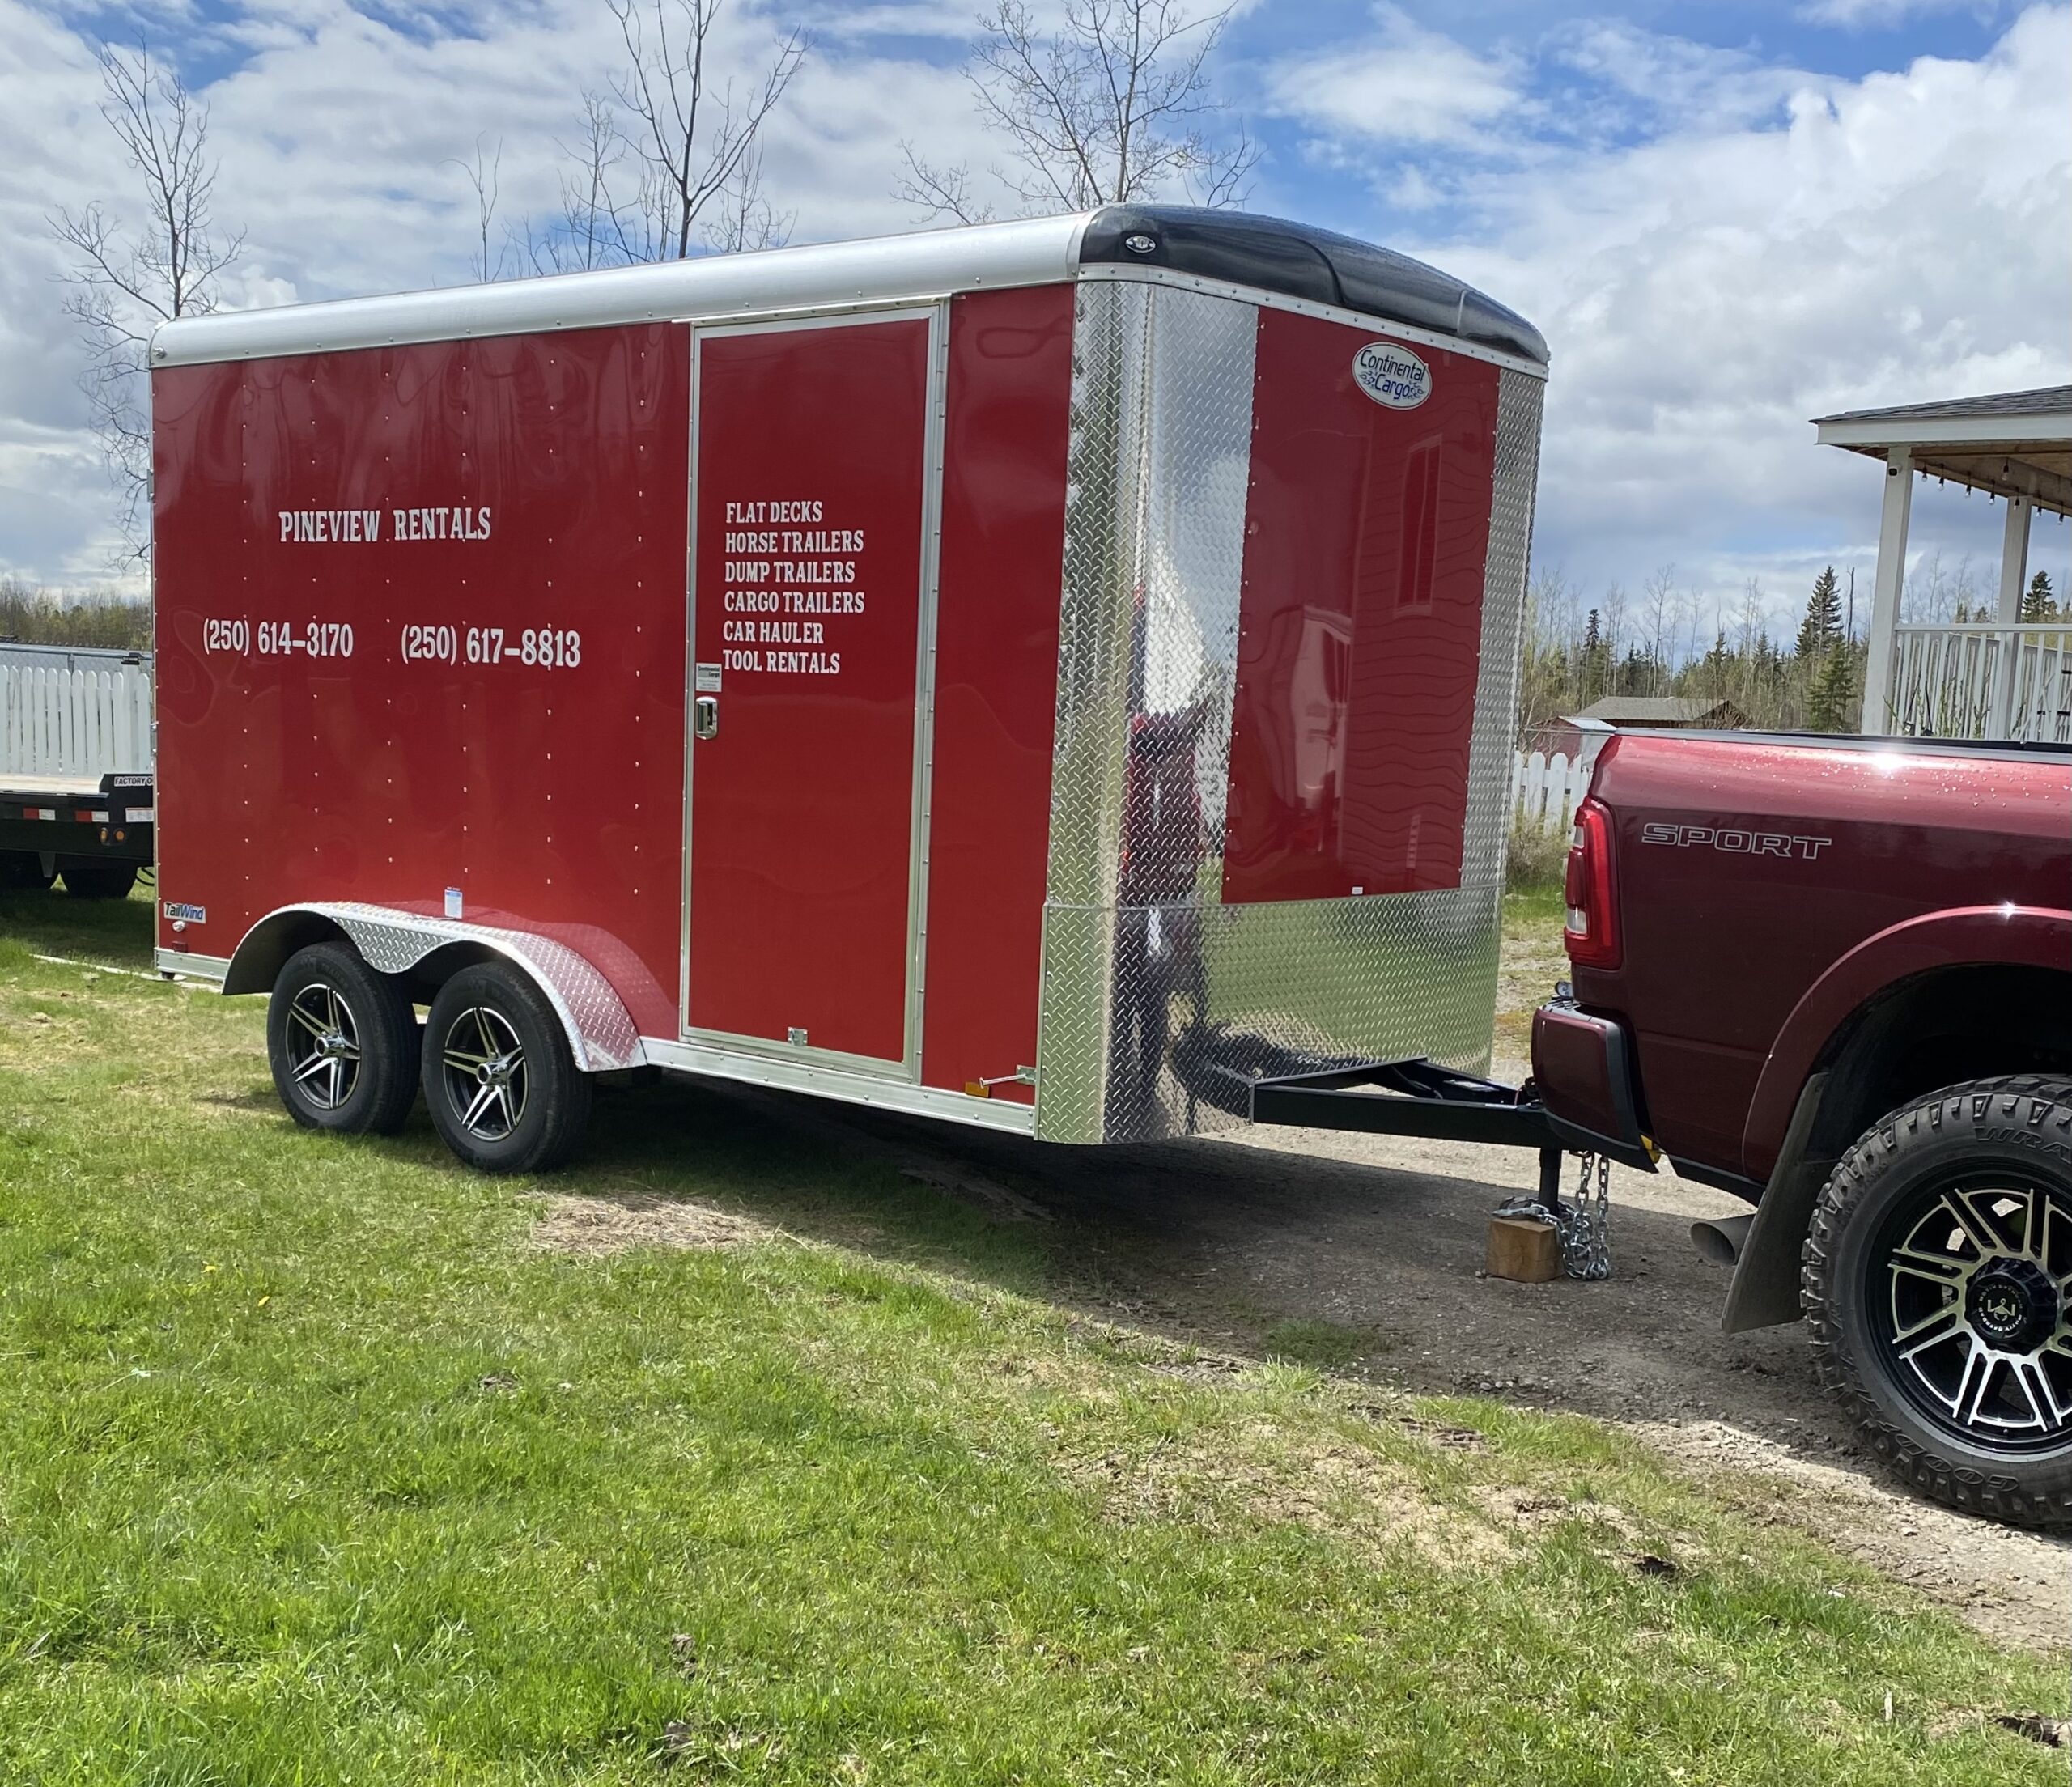 Pineview Rentals Trailer with Decals